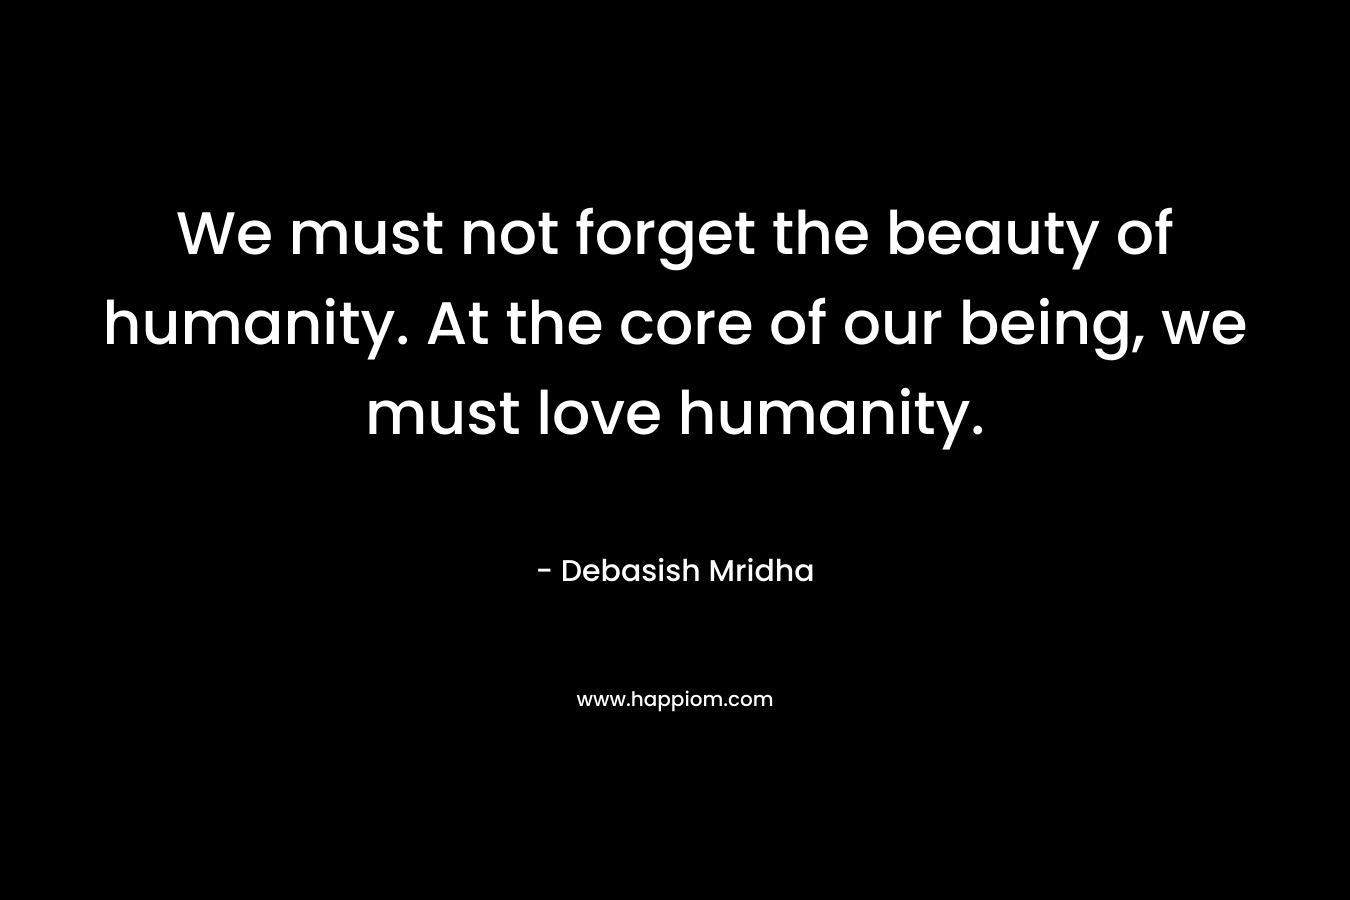 We must not forget the beauty of humanity. At the core of our being, we must love humanity.